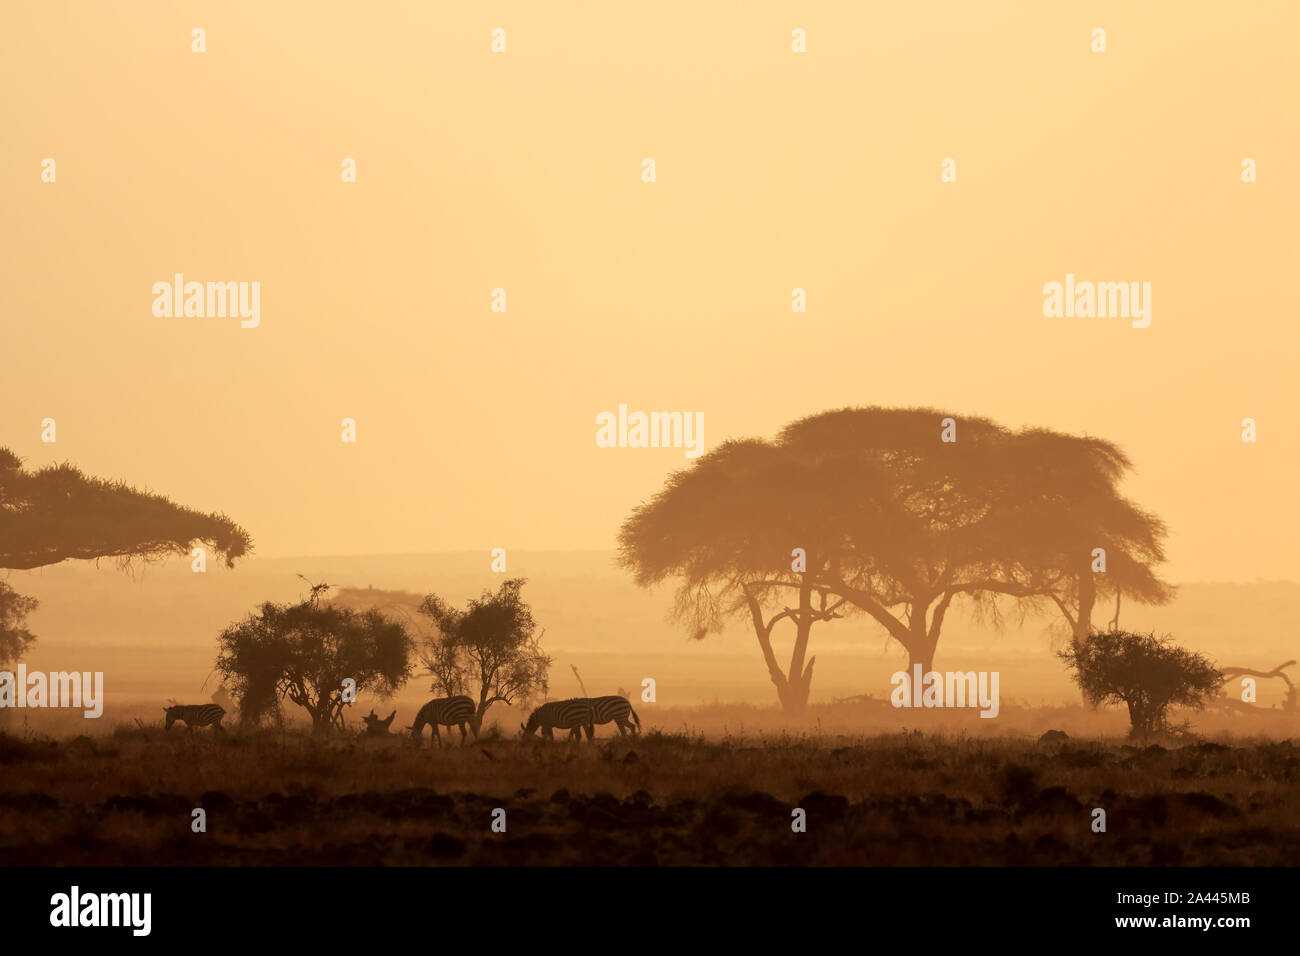 African sunset with silhouetted trees and plains zebras, Amboseli National Park, Kenya Stock Photo